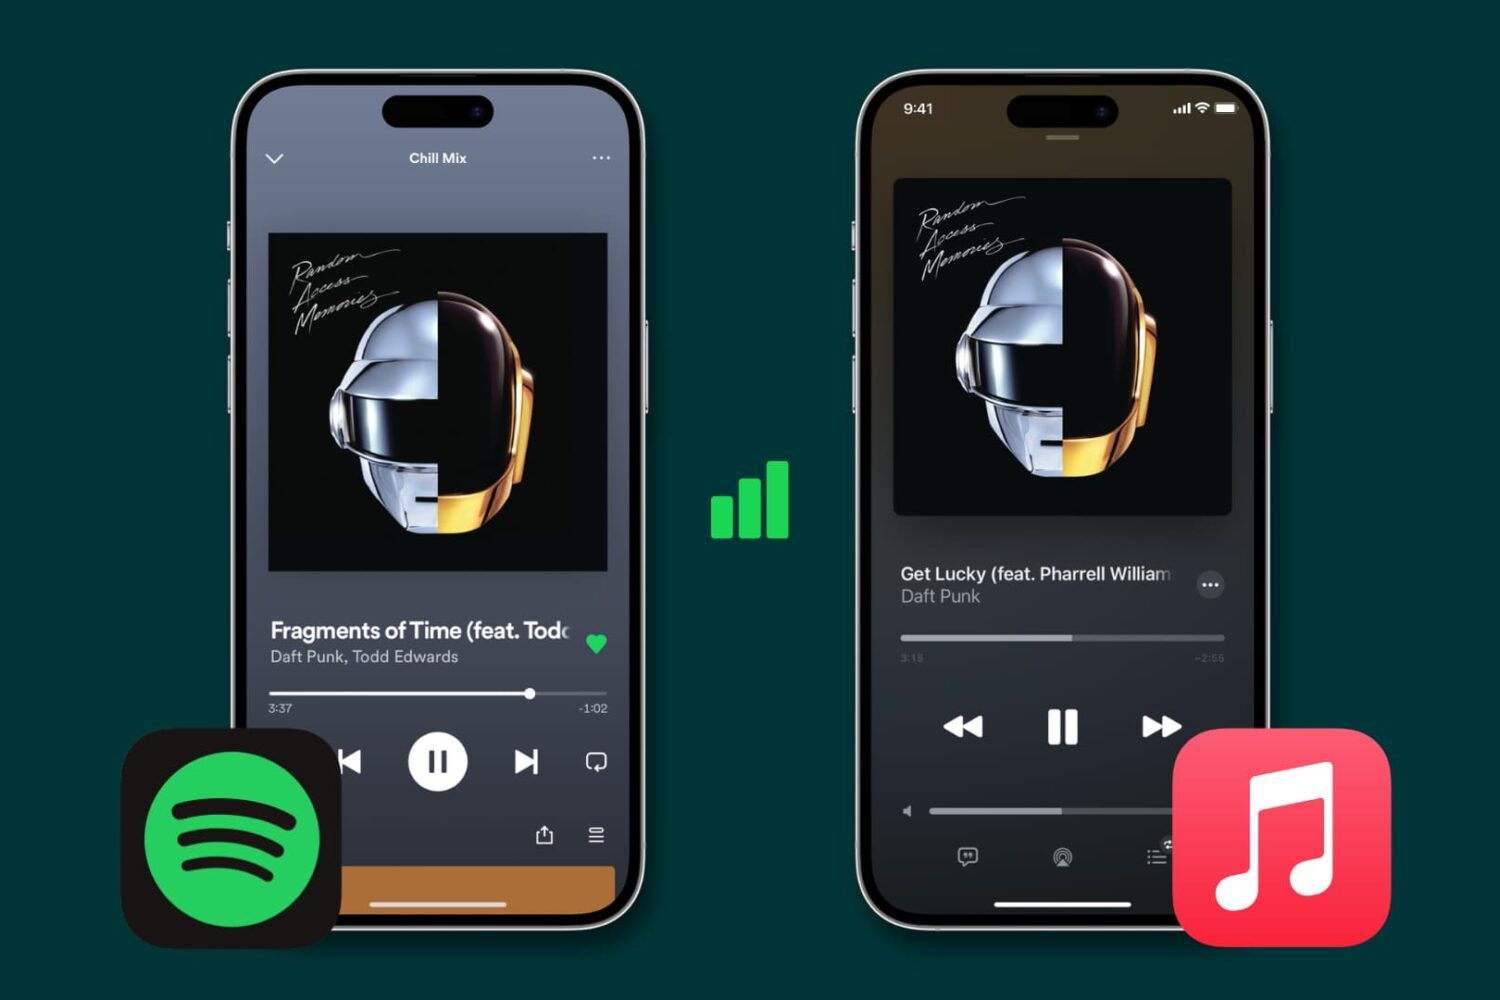 Spotify and Apple Music Now Playing screen on iPhone